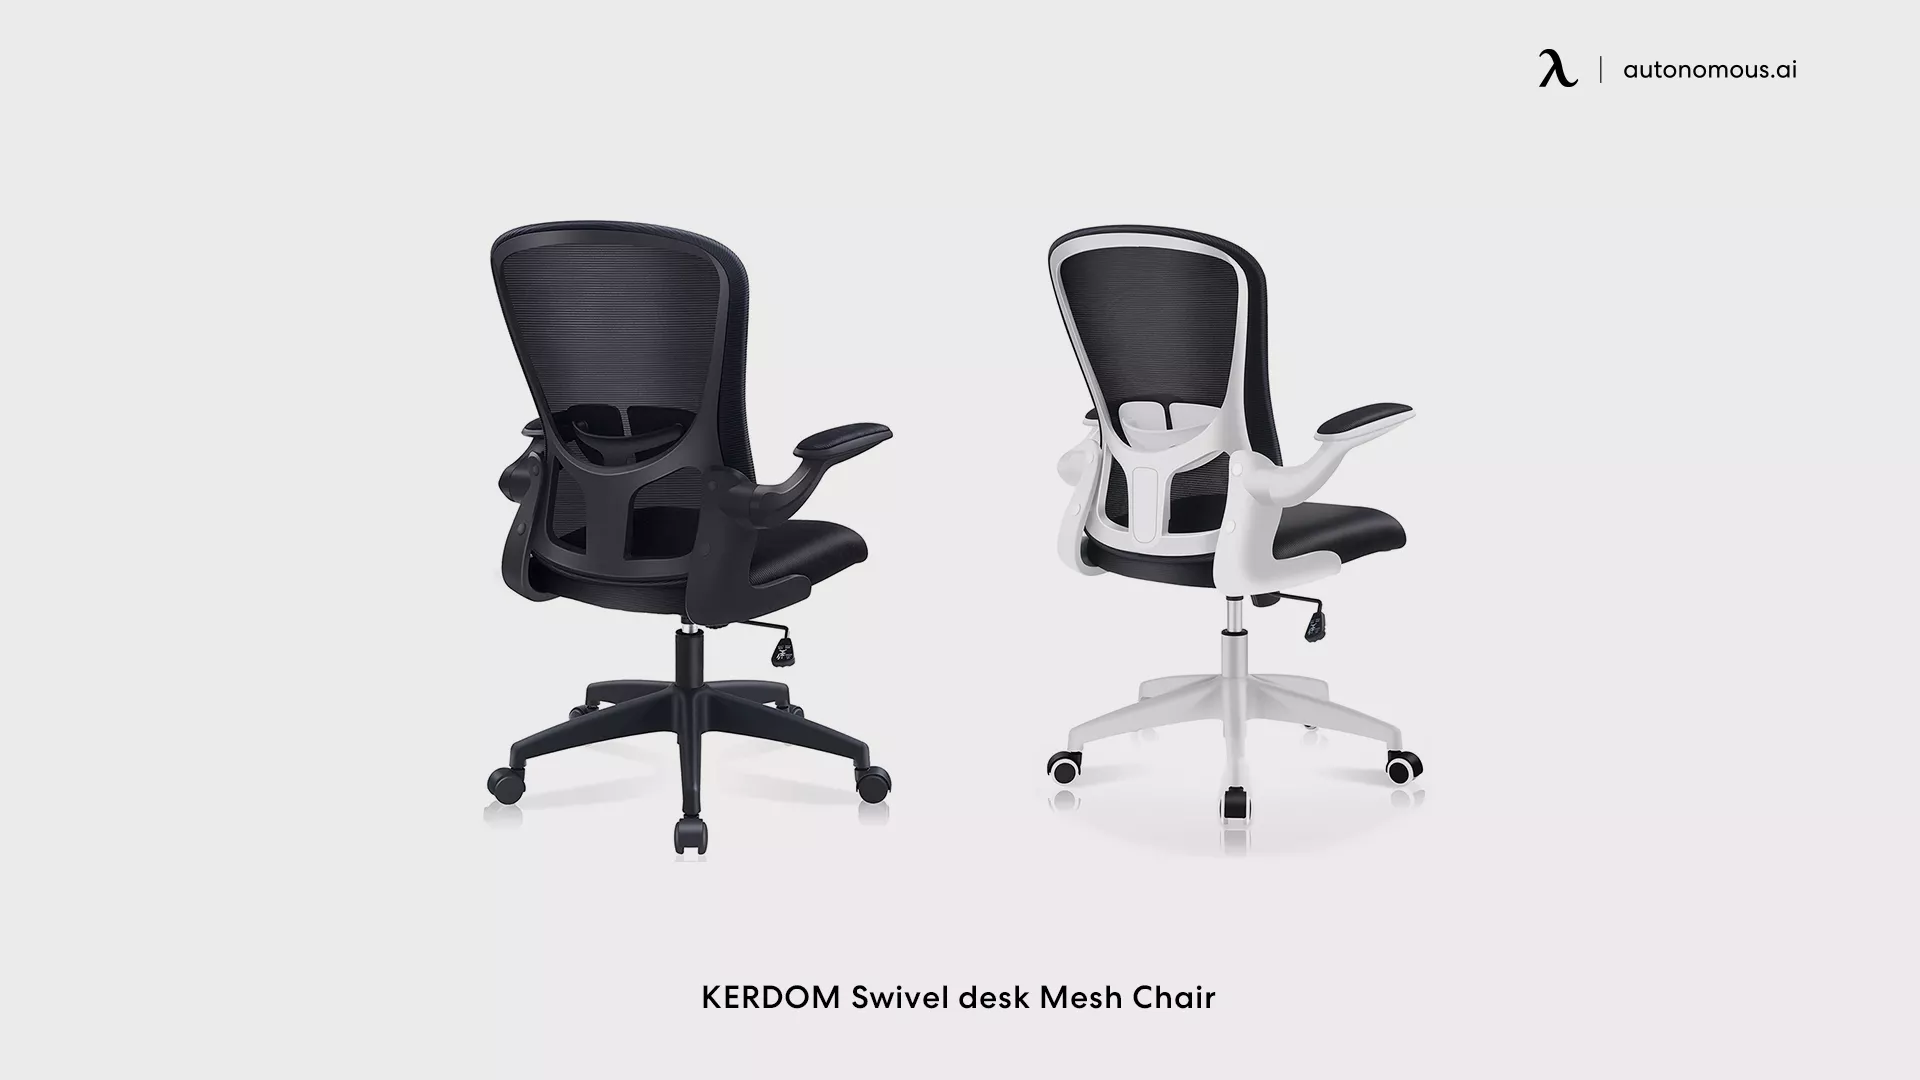 KERDOM Swivel Desk Mesh office chair with flip-up arms